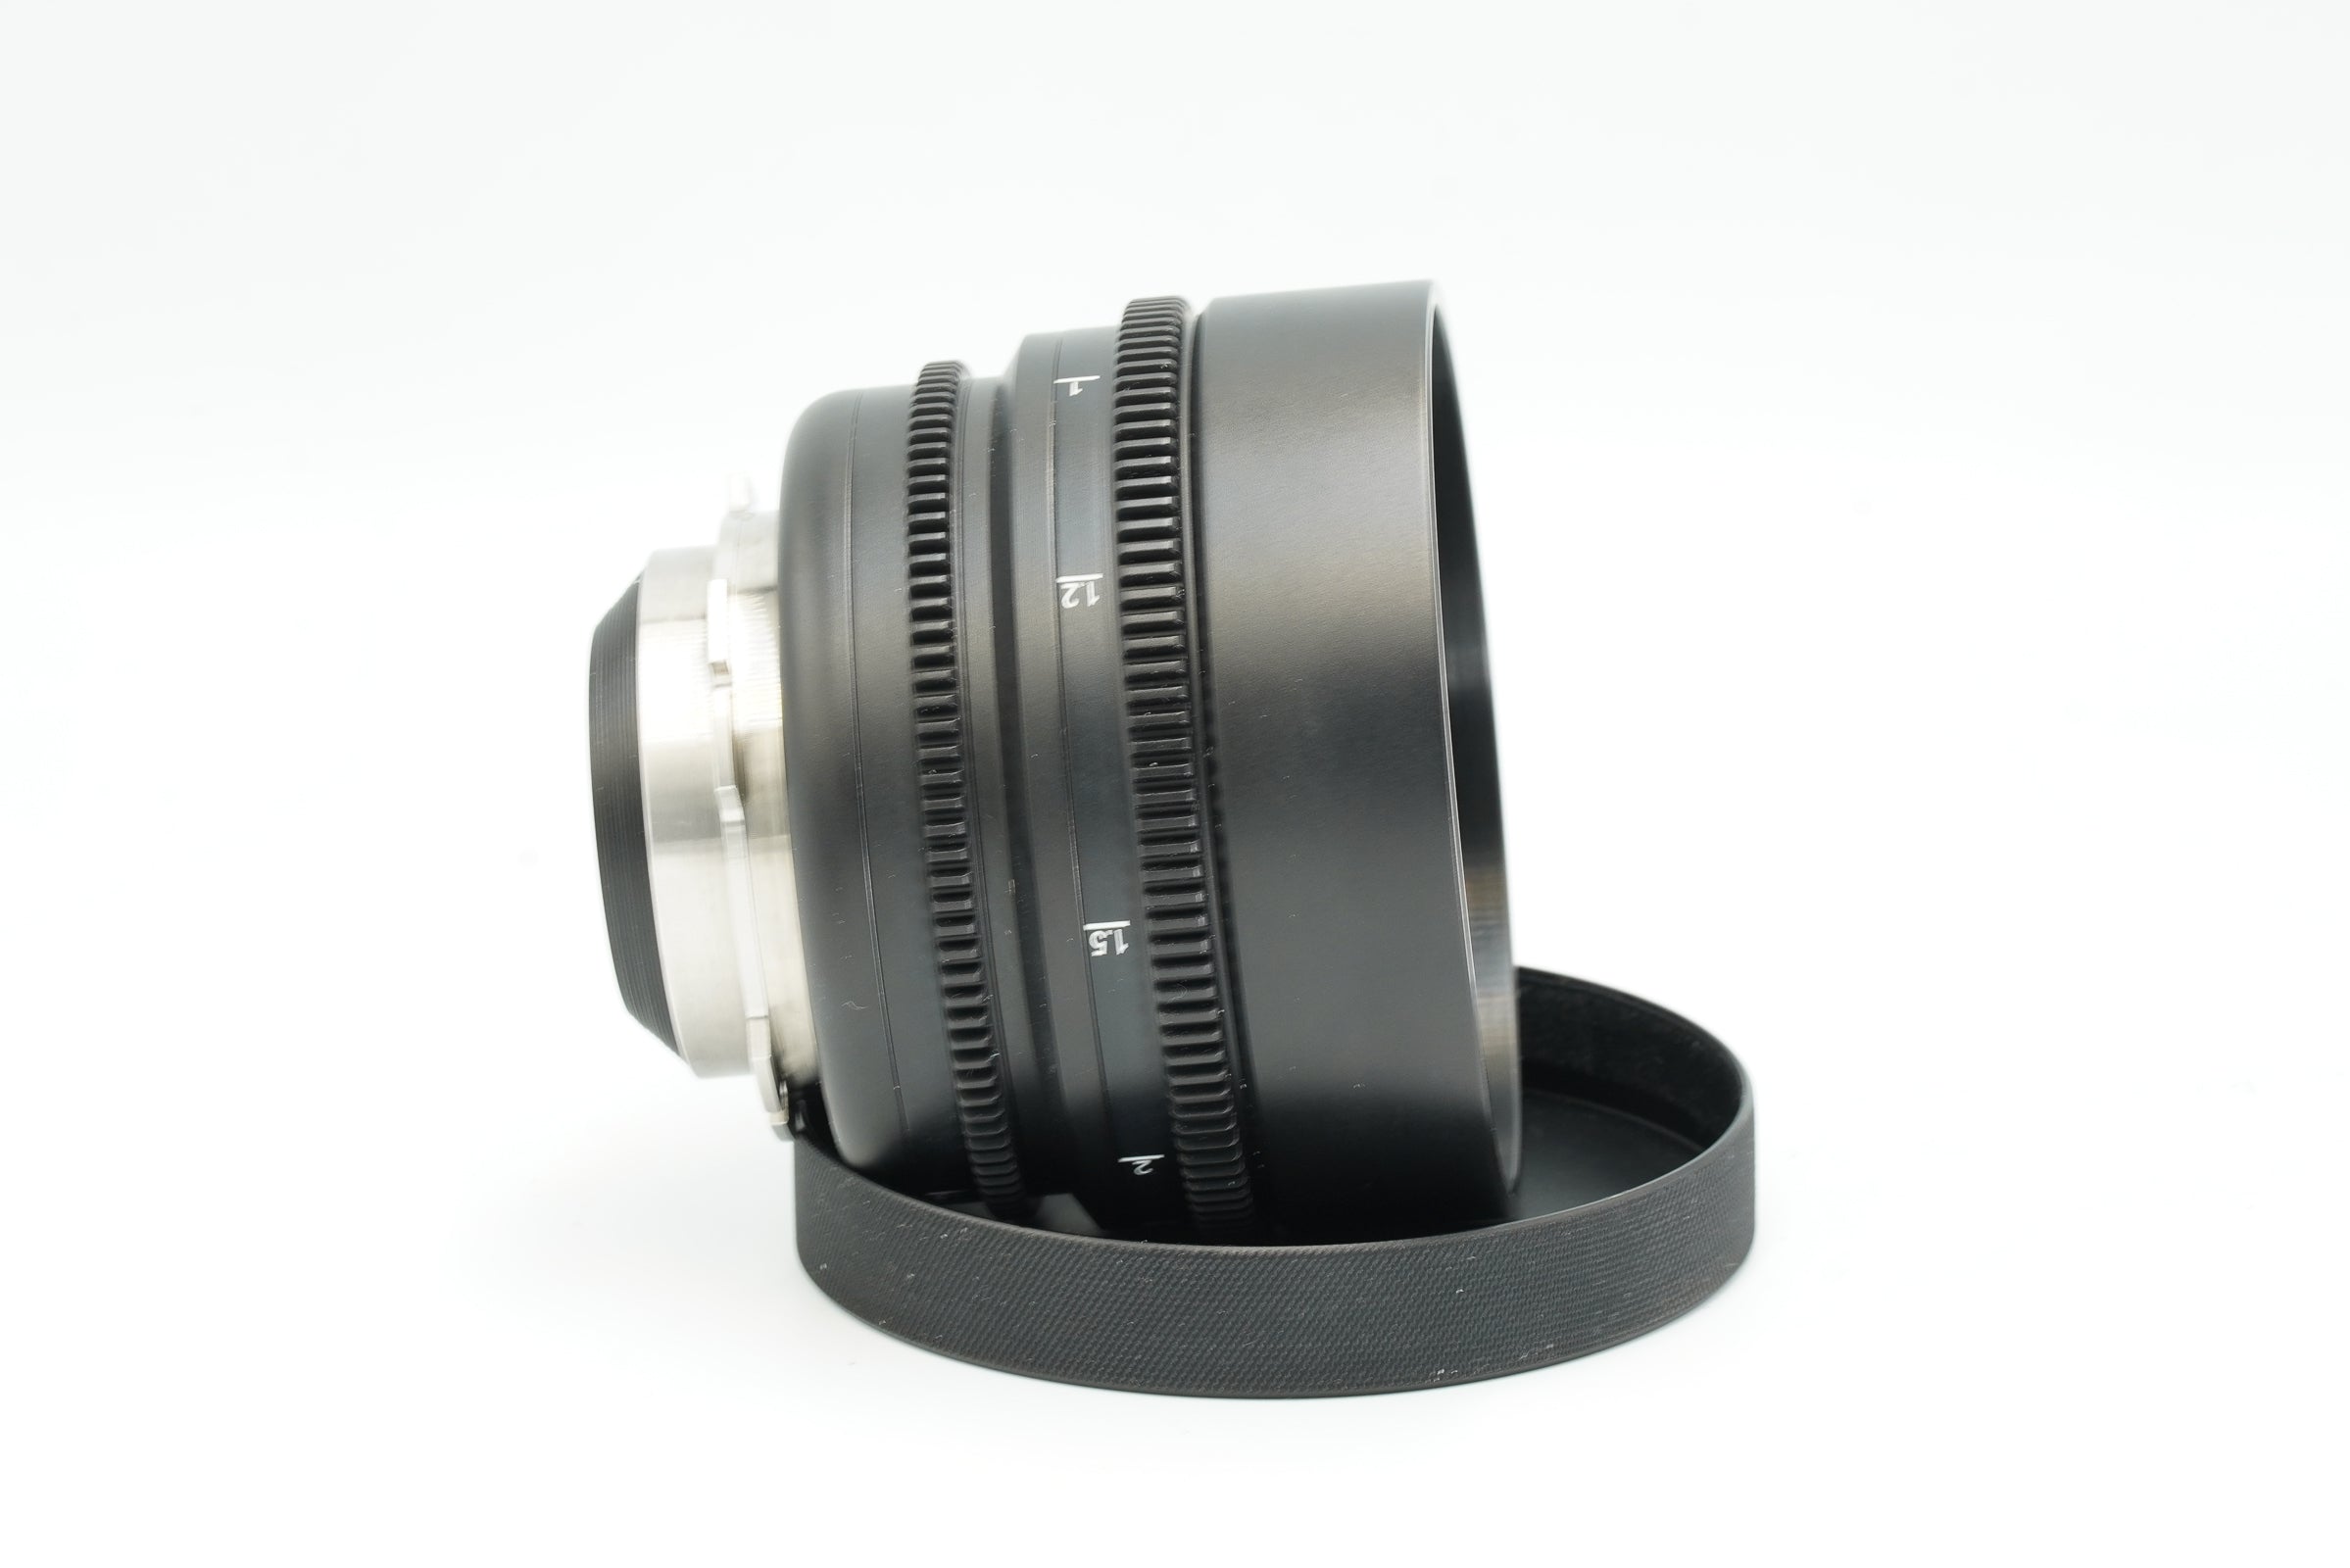 MIR 1B - 37mm f2.8 REHOUSED for video - UNIQUE in UAE